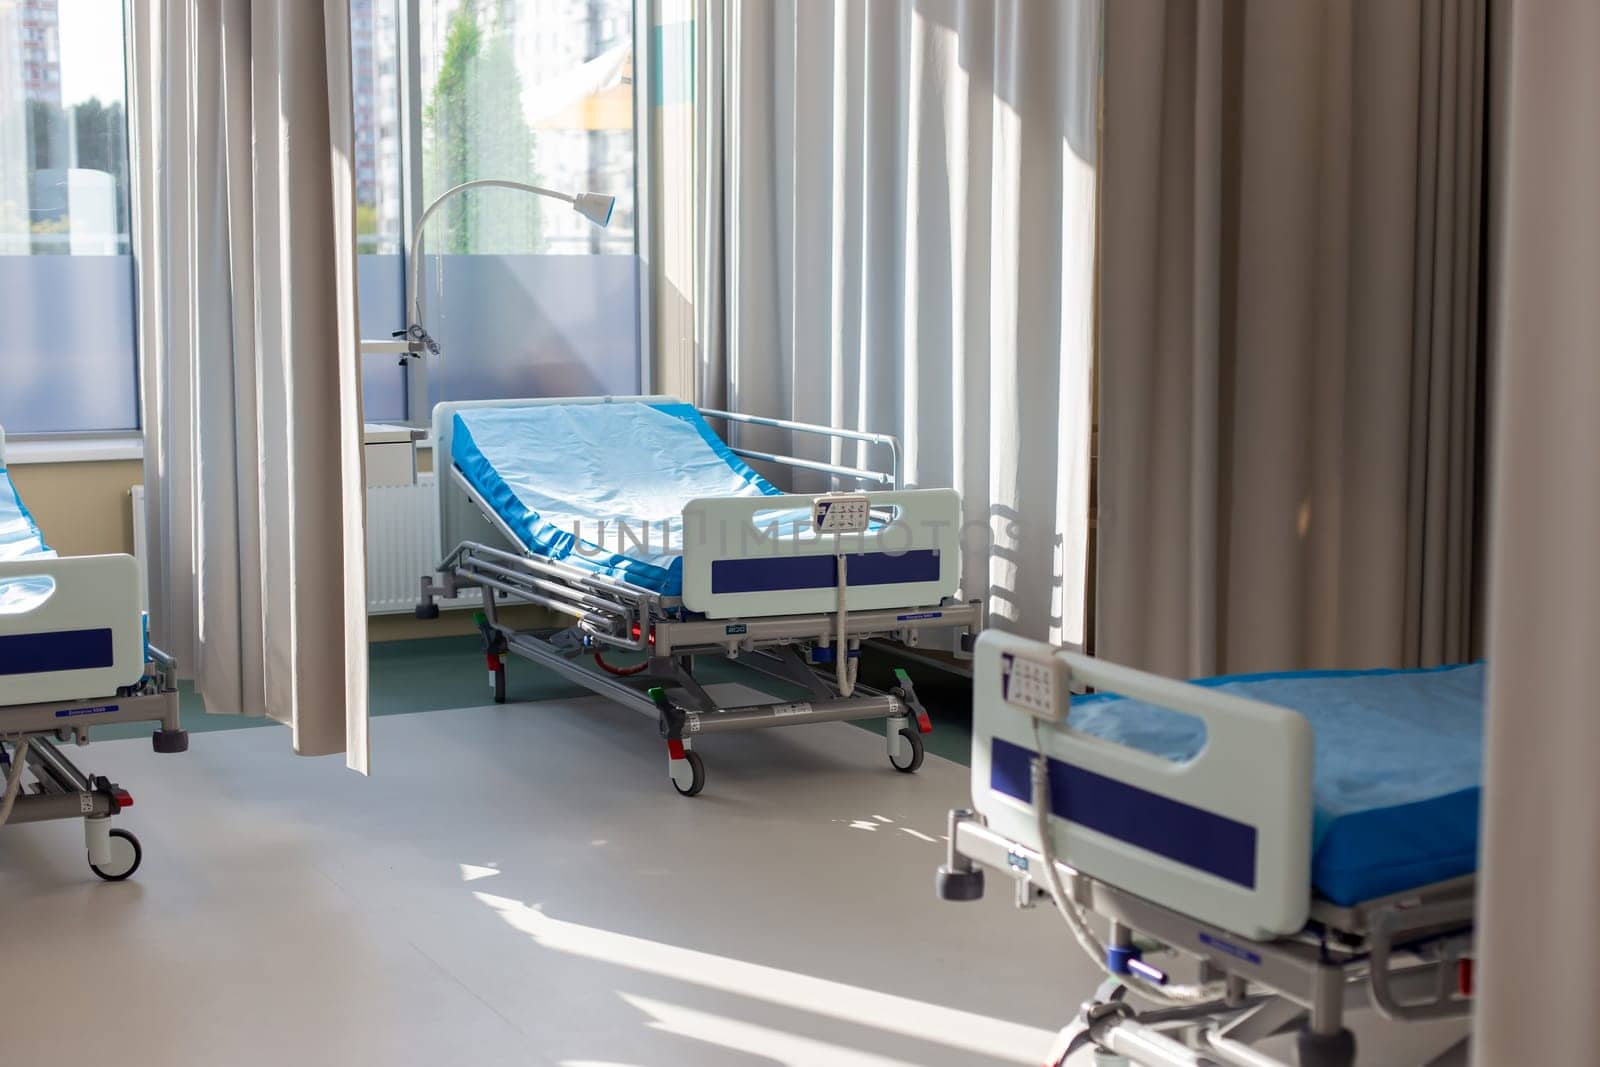 Moscow, Moscow region, Russia - 03.09.2023:Modern hospital room with unoccupied beds and sunlit curtains